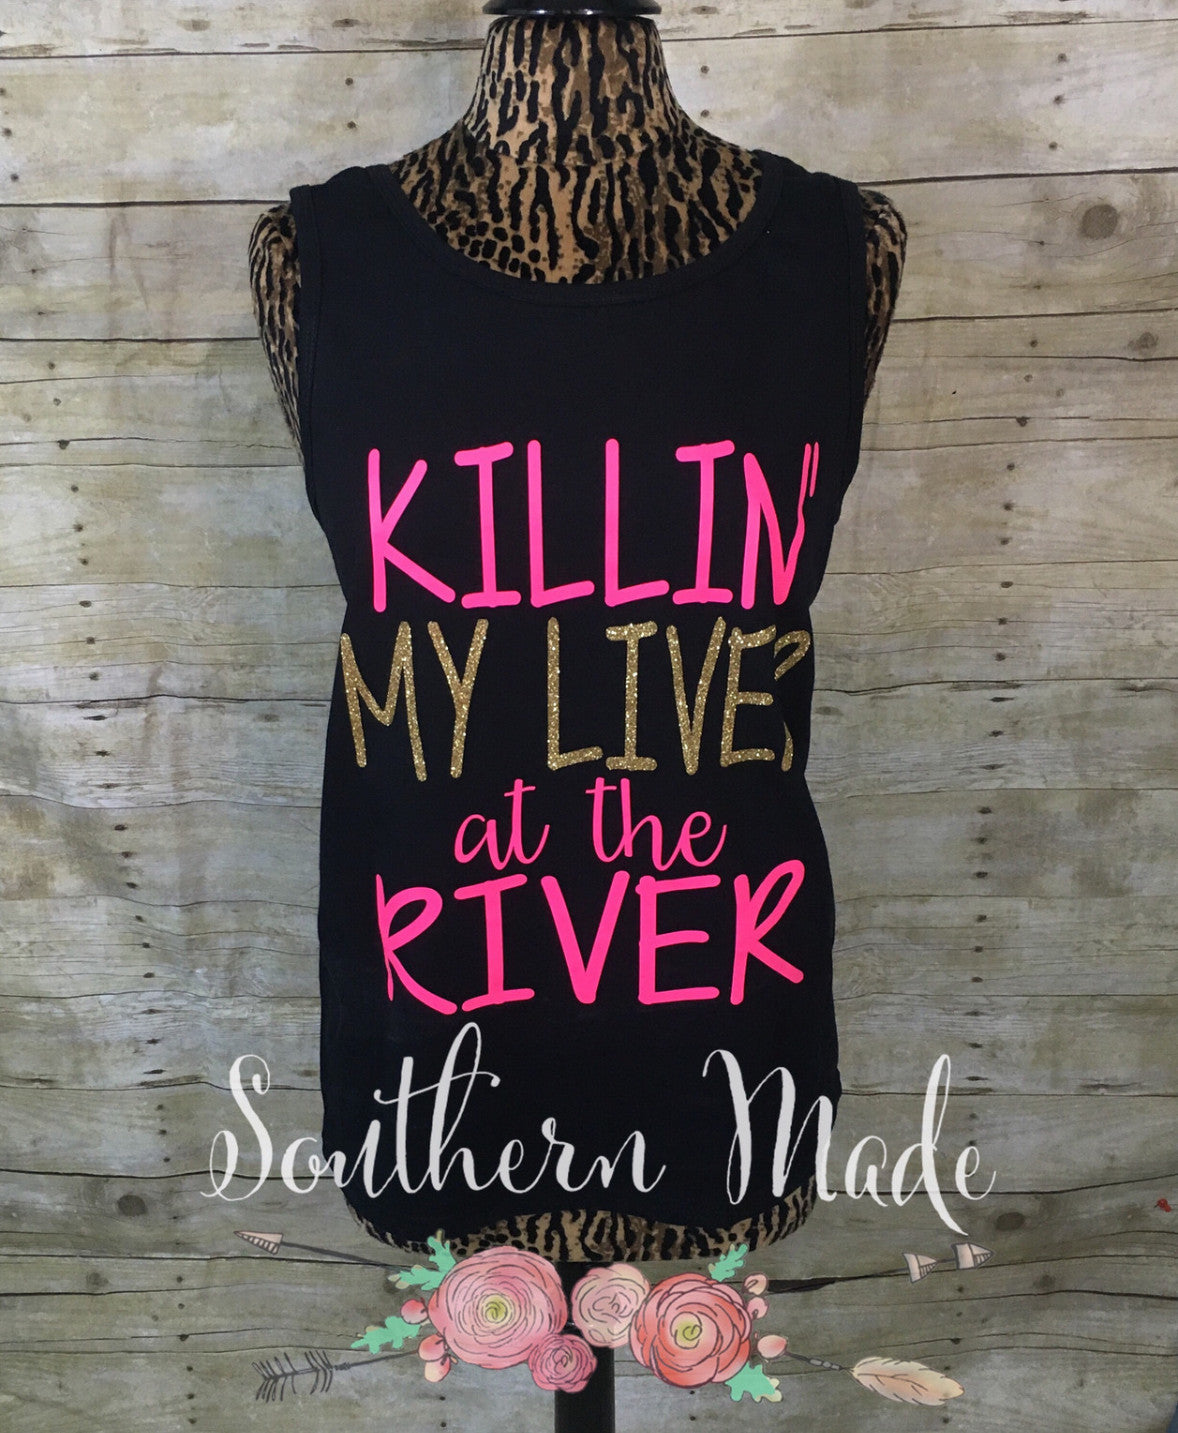 Killin' My Liver at the River Tank - Unisex or Womens Fit - Choose All Colors